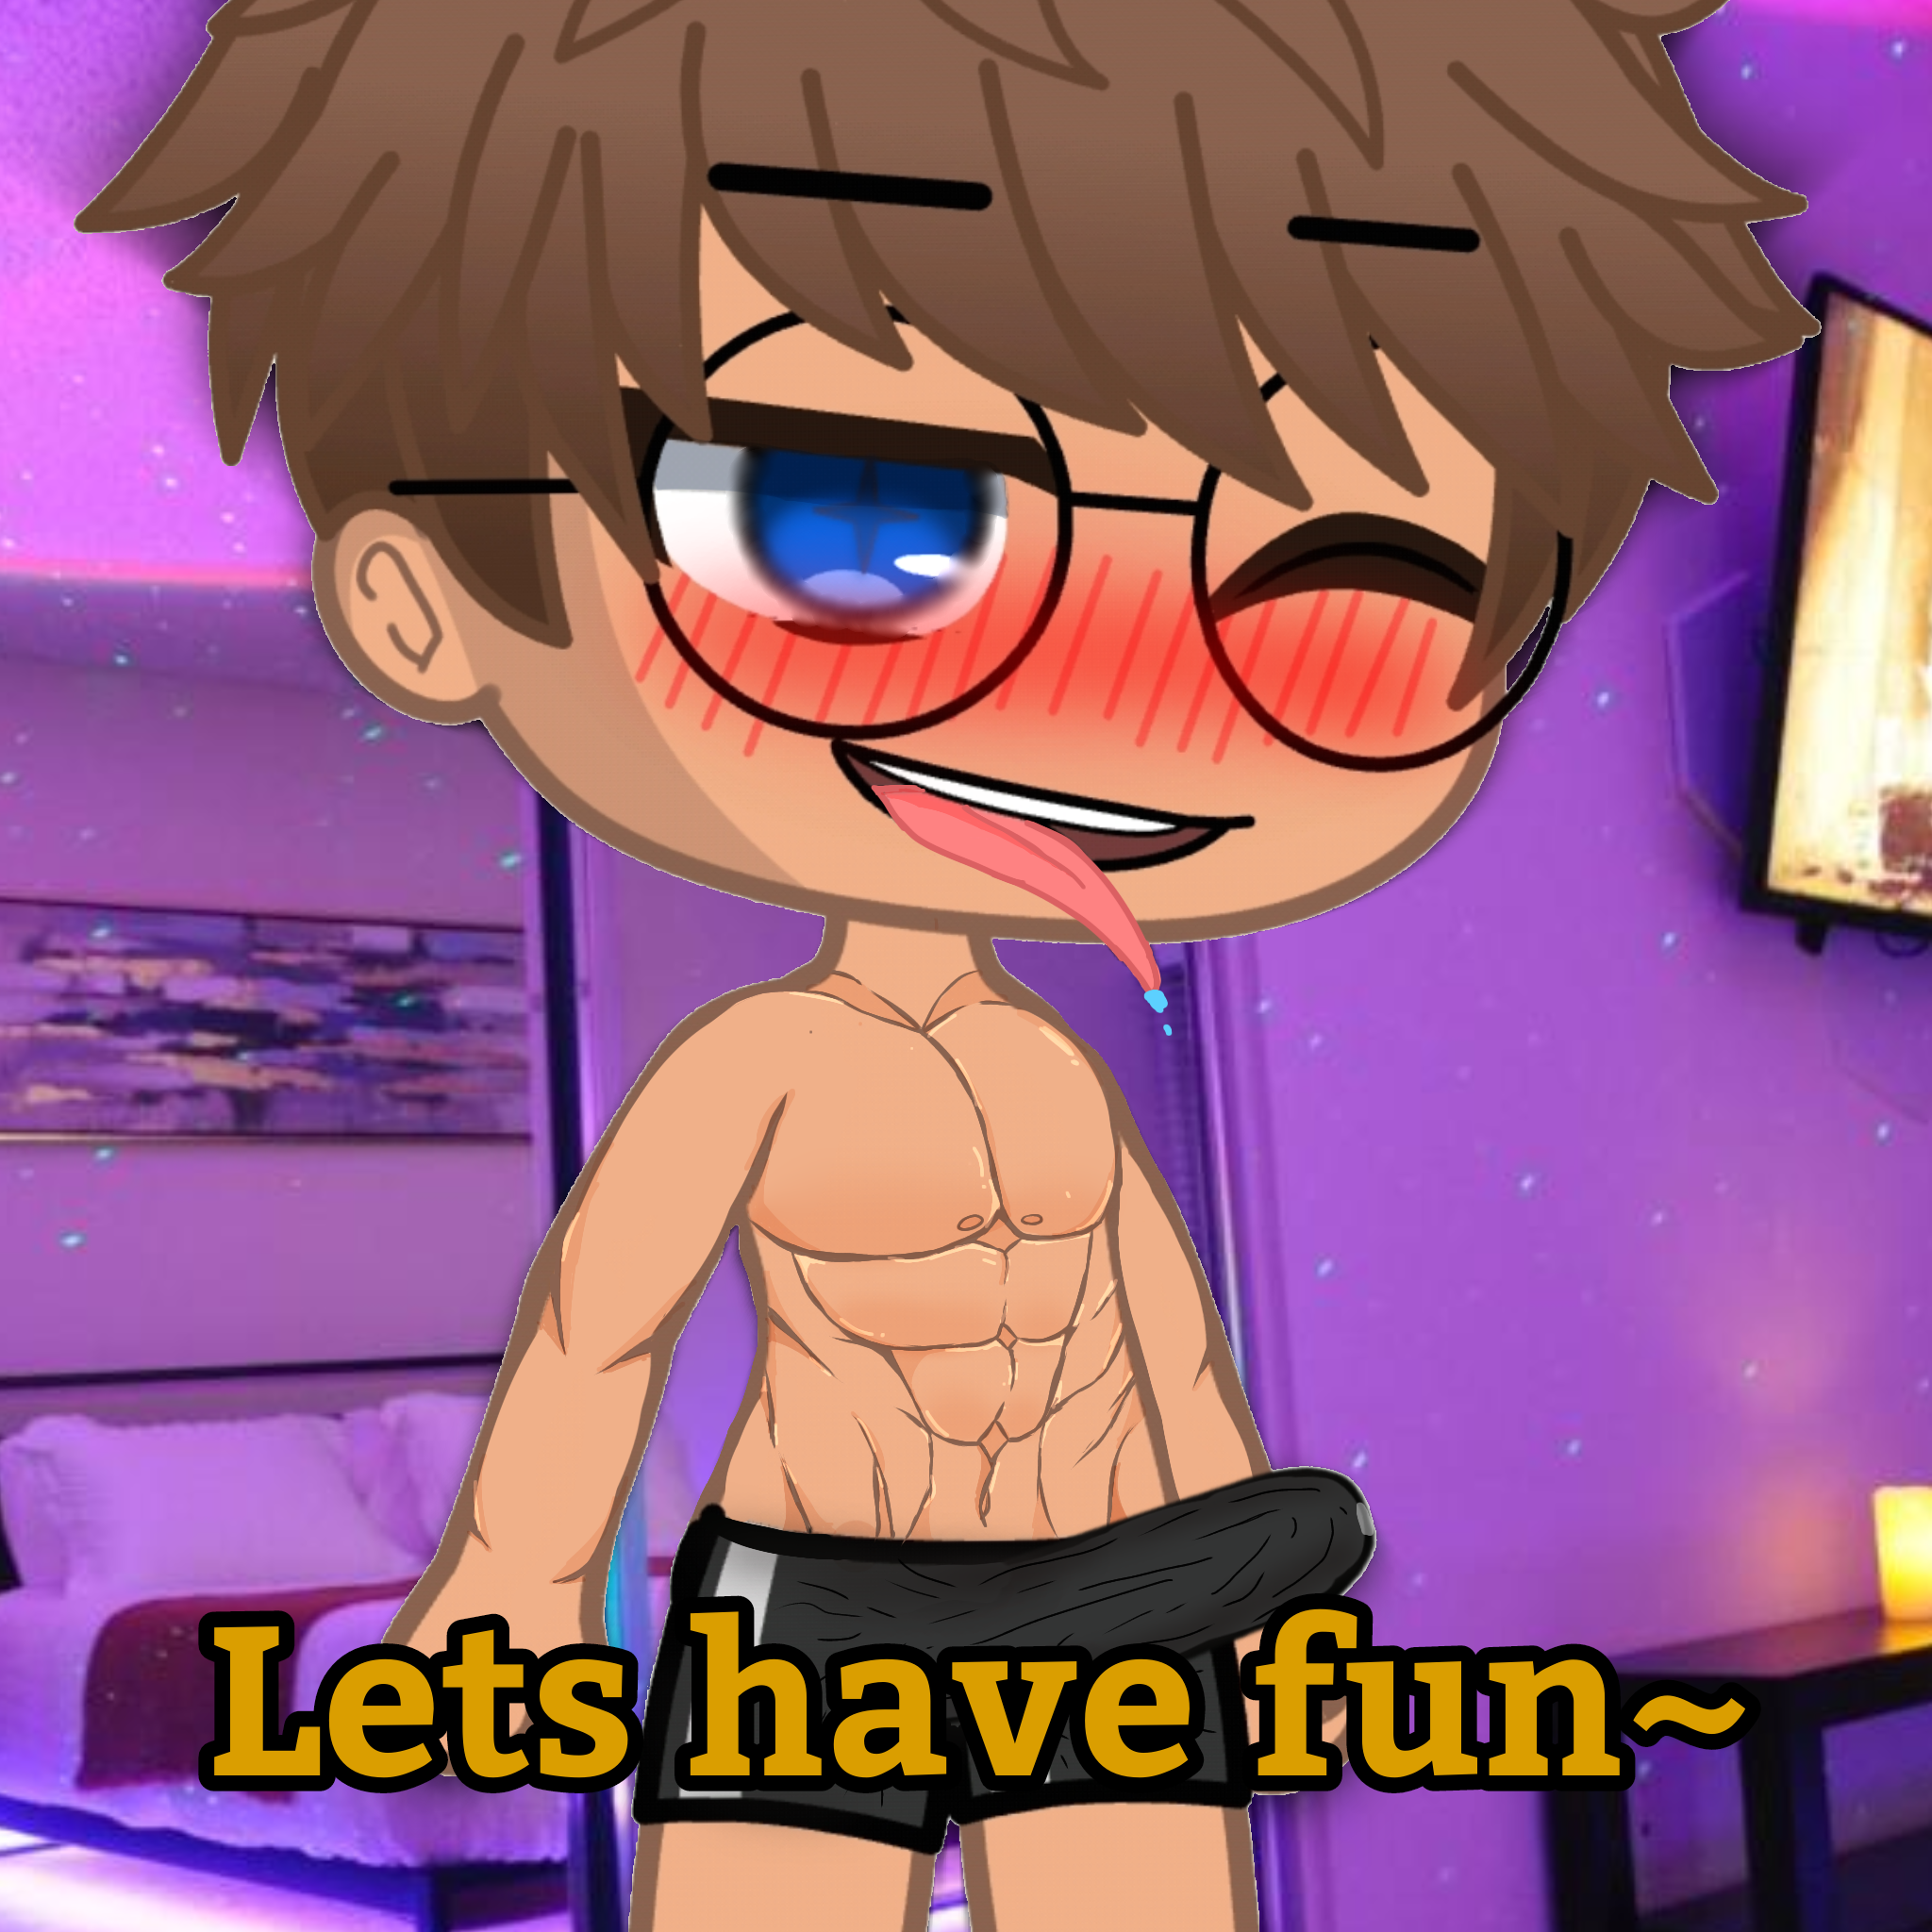 "Let's have fun~ You know you wanna~ ;)"